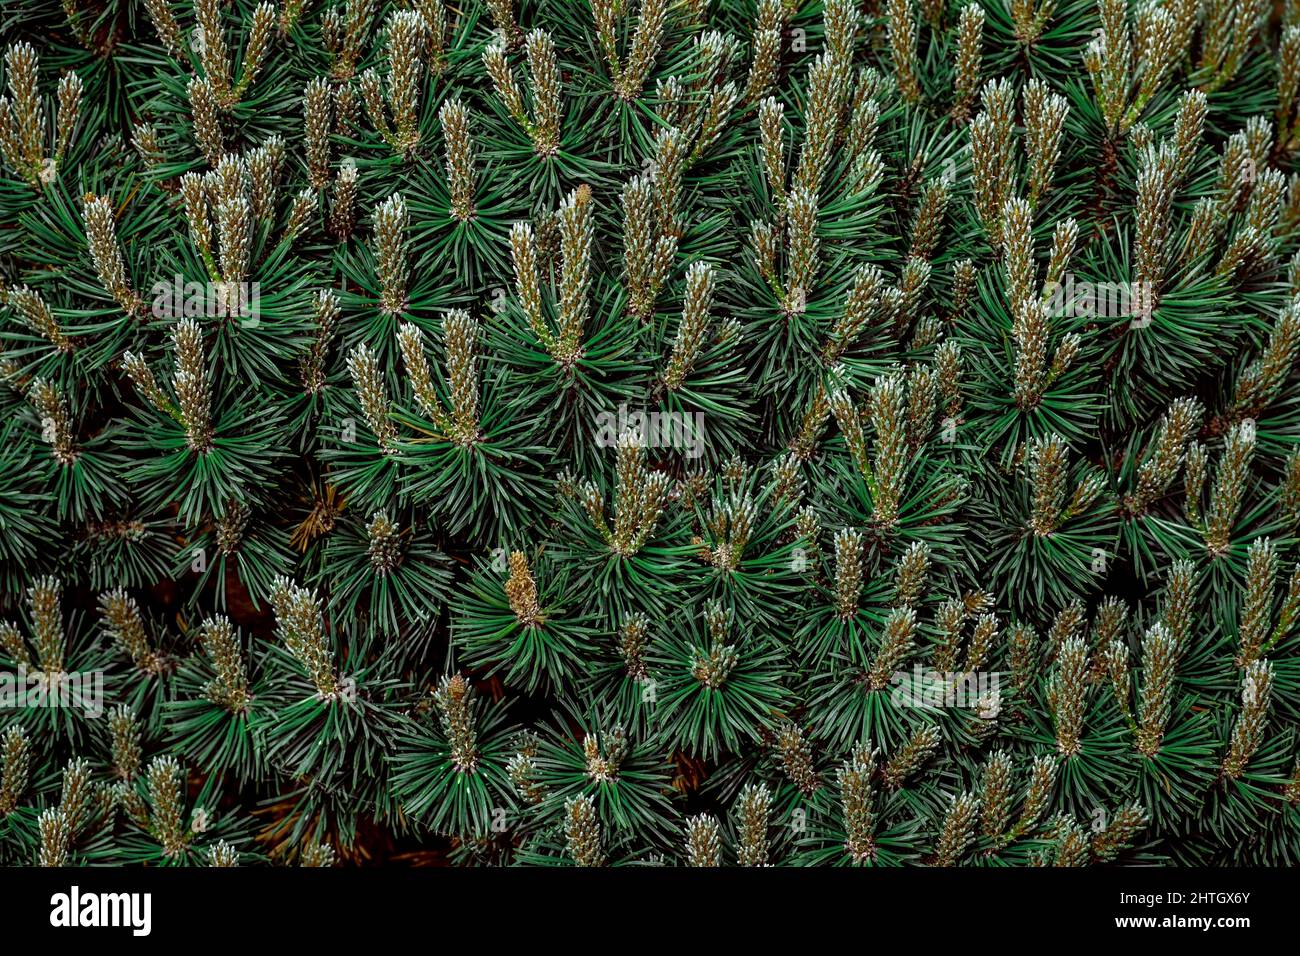 Green spruce needles texture wallpaper, green natural background Stock Photo